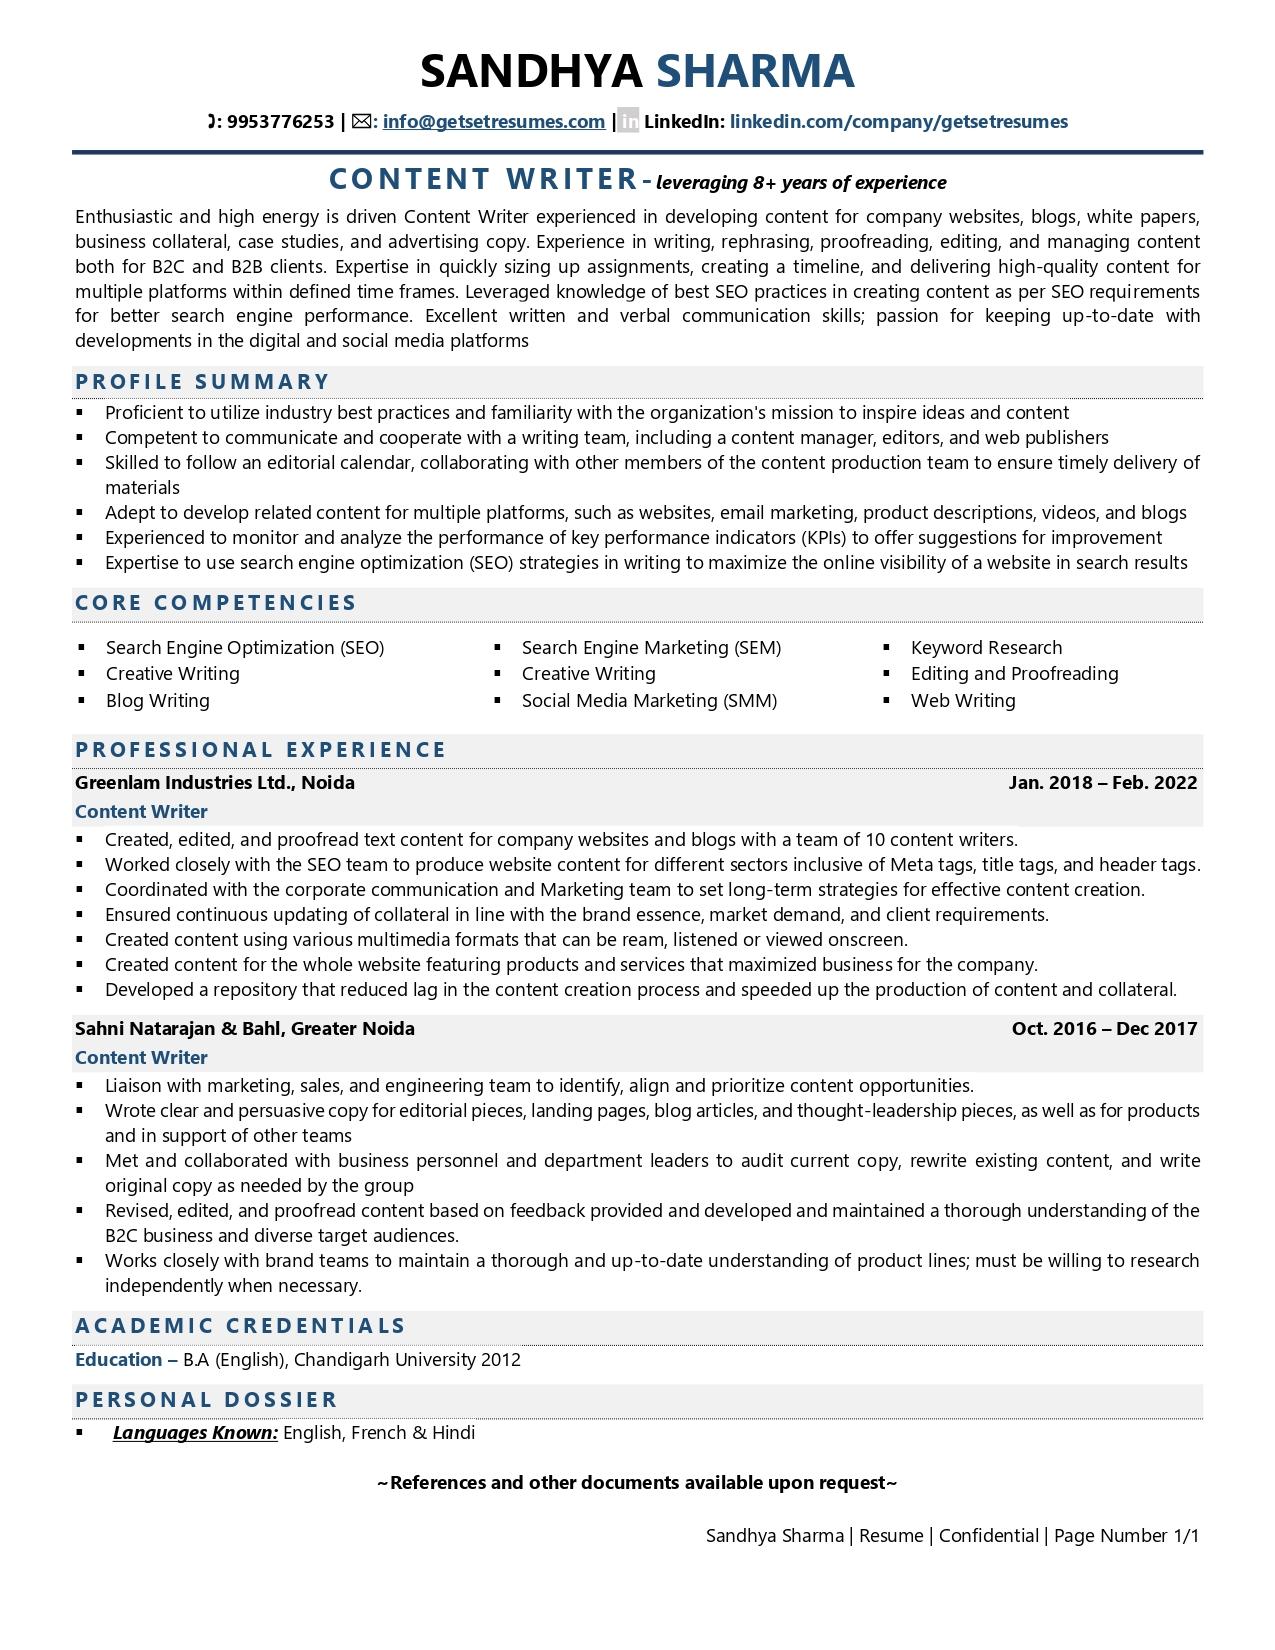 Content Writer - Resume Example & Template